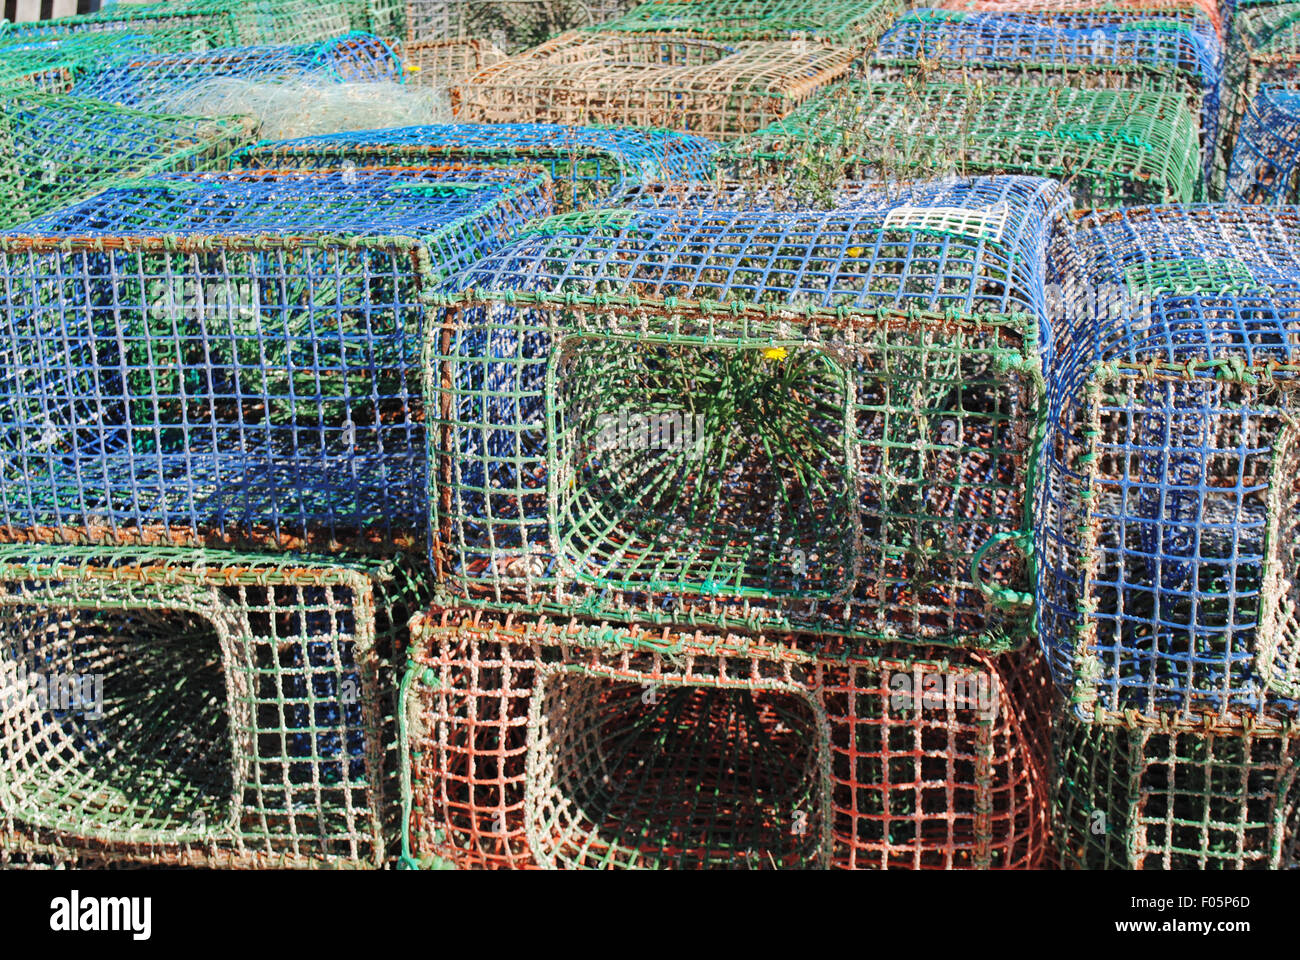 A close-up of lobster/crab traps. Stock Photo